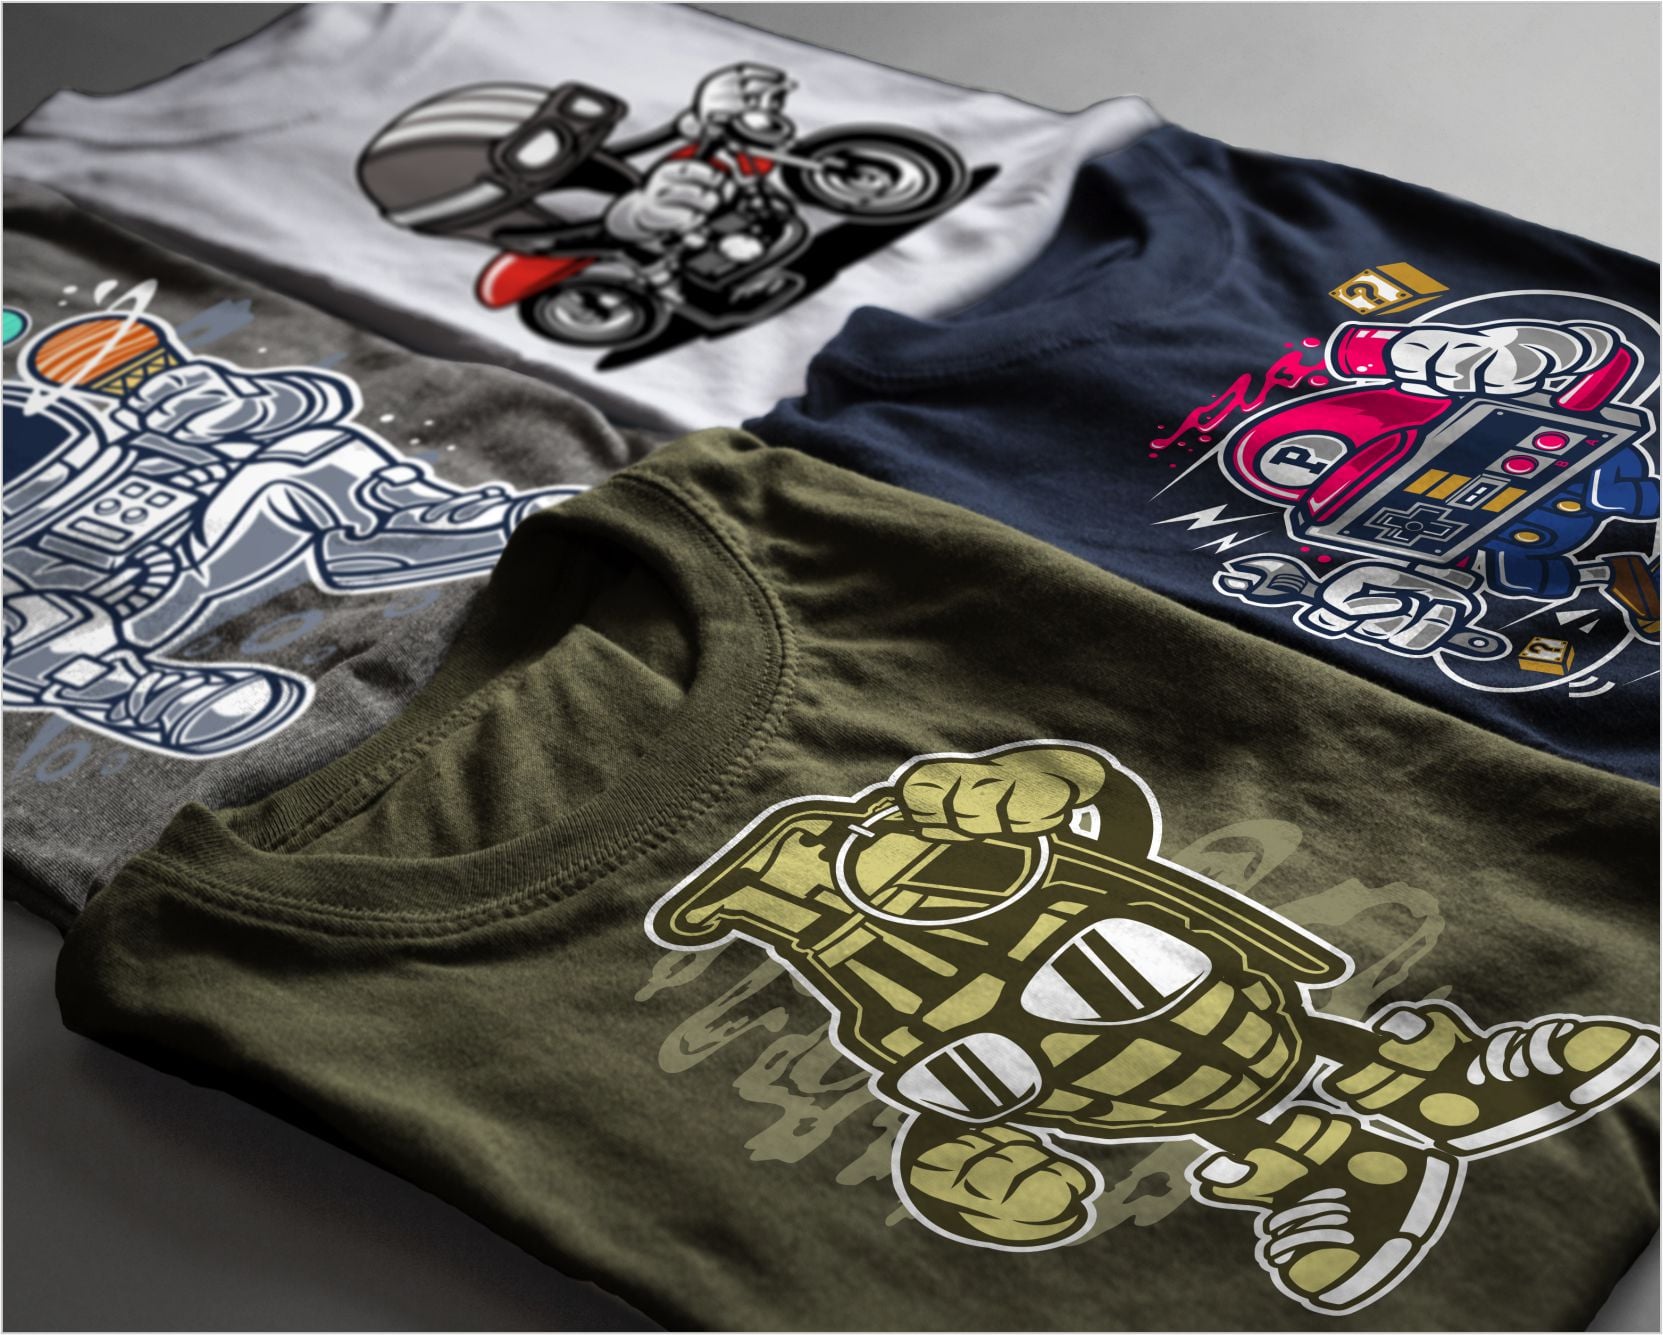 High-quality t-shirts collection with cartoon graphics.